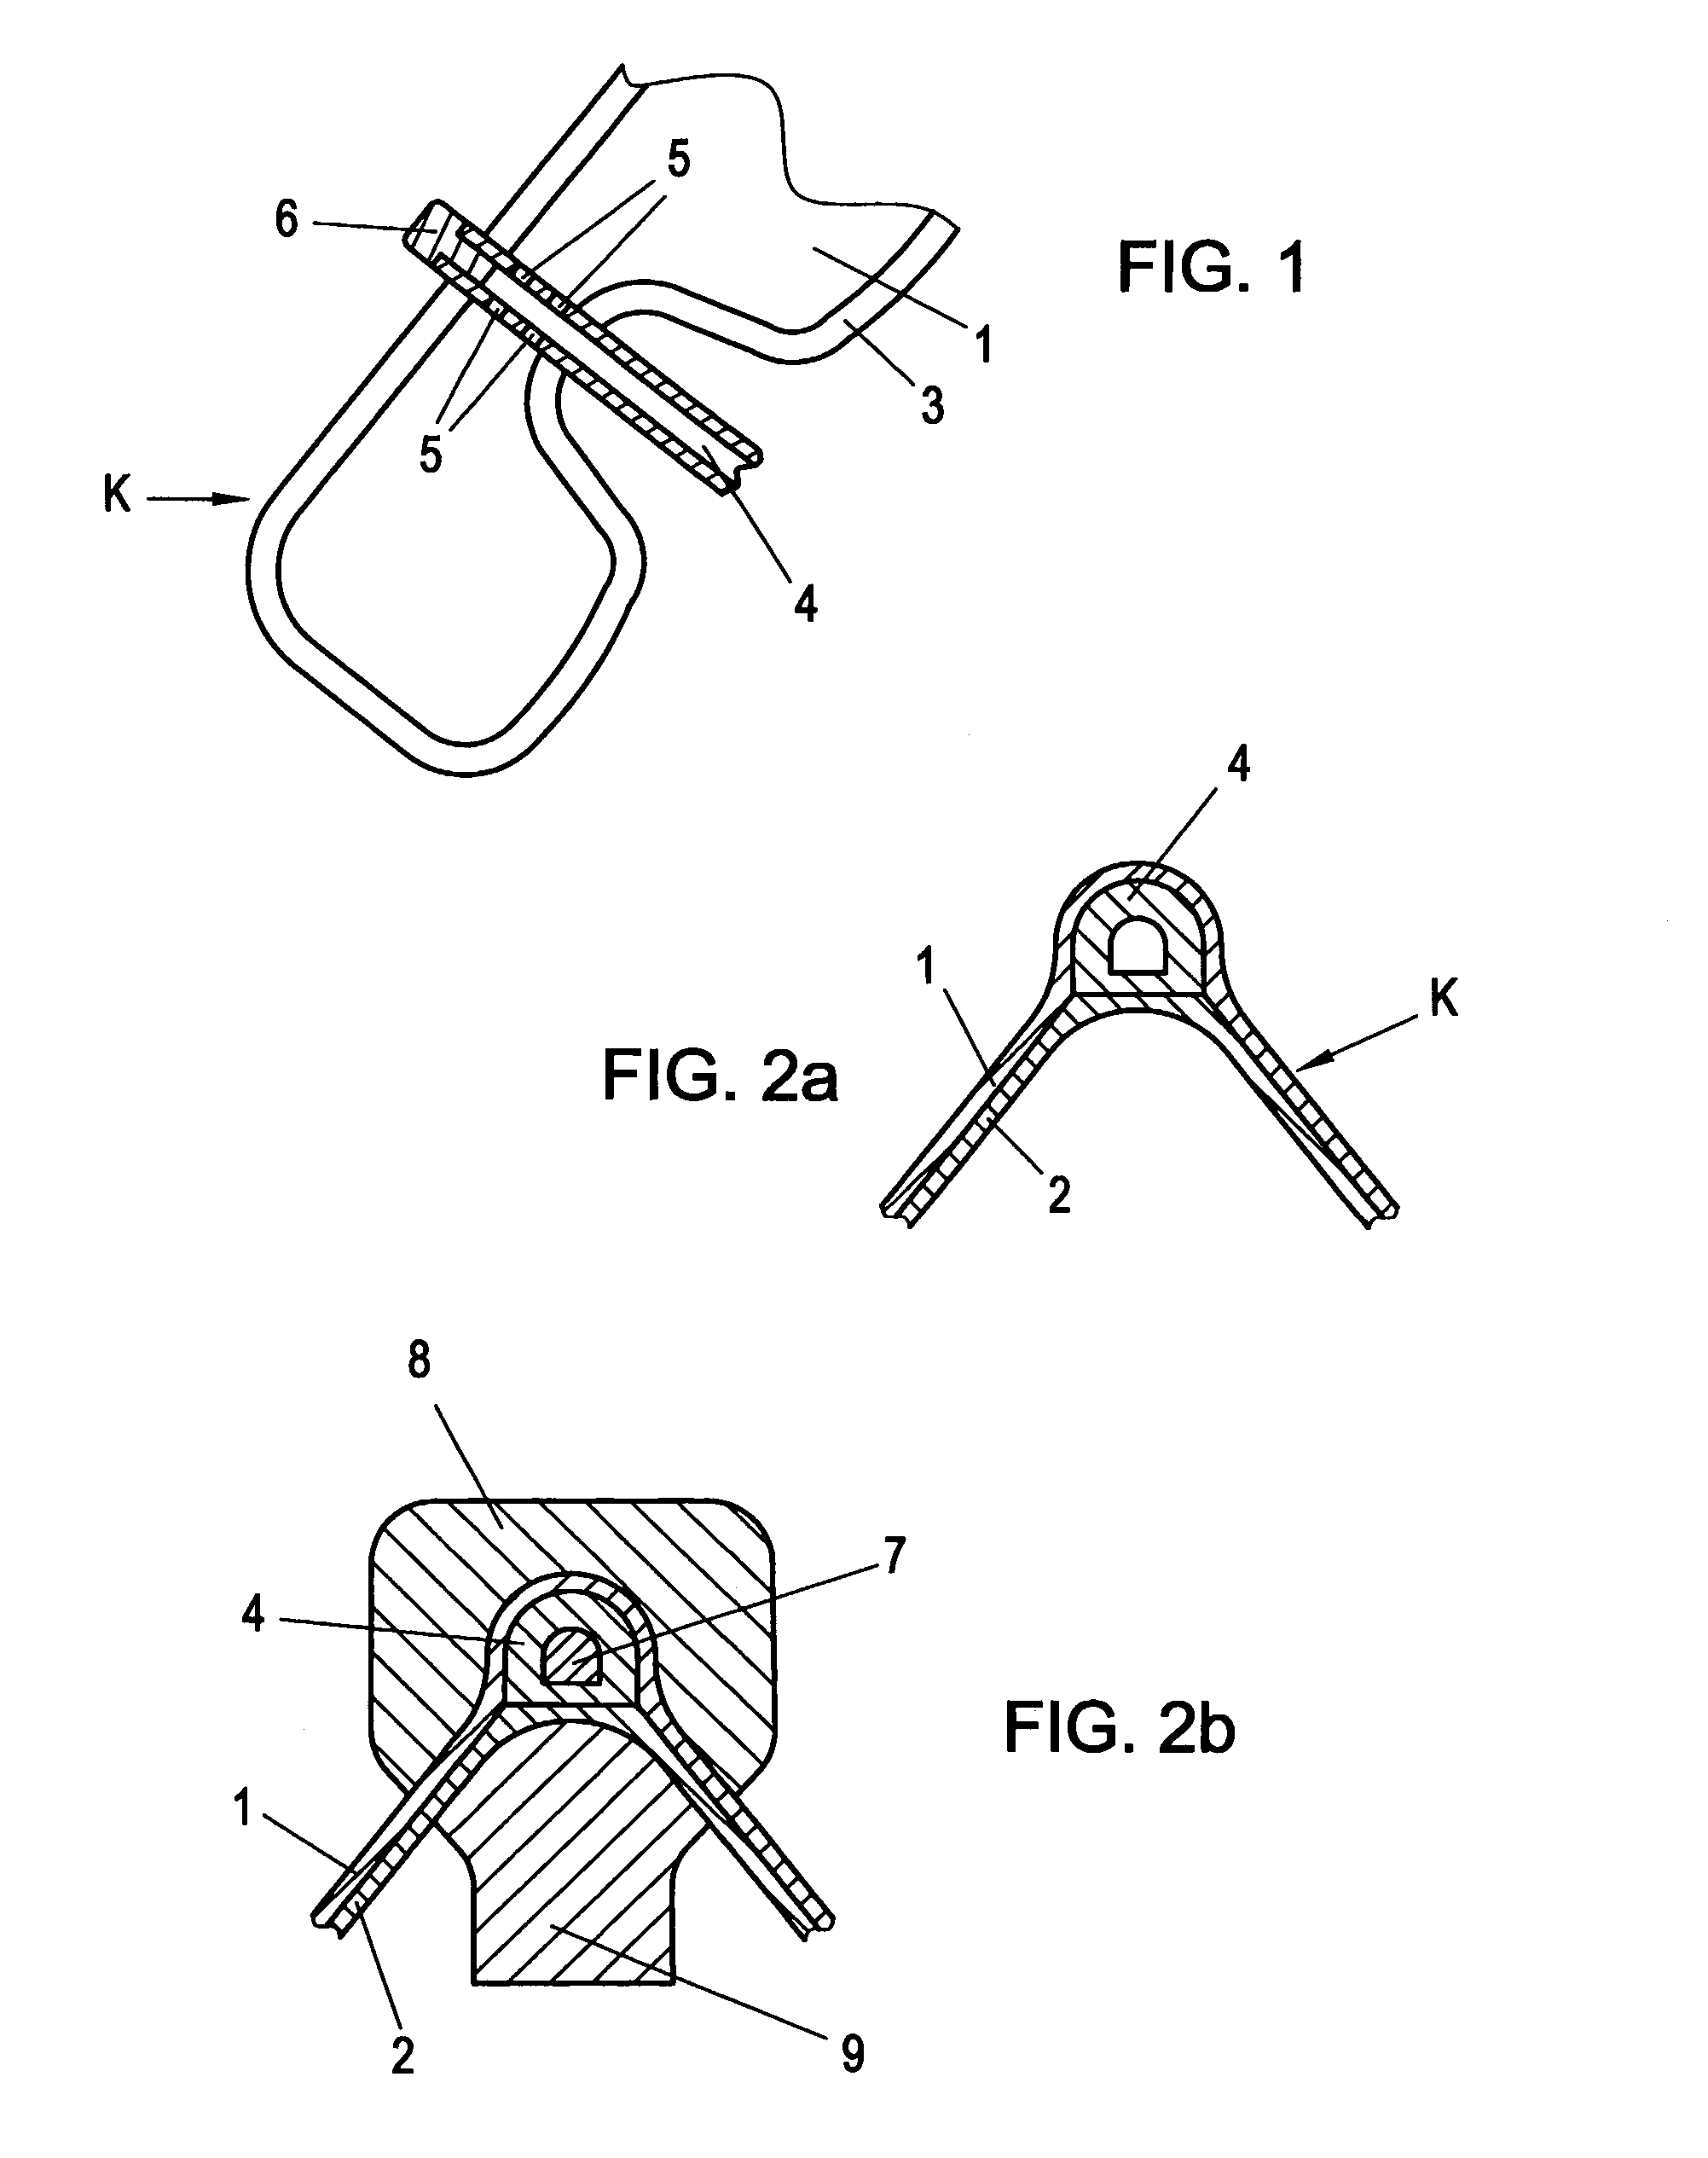 Volume-flexible body fillable with a fluid element